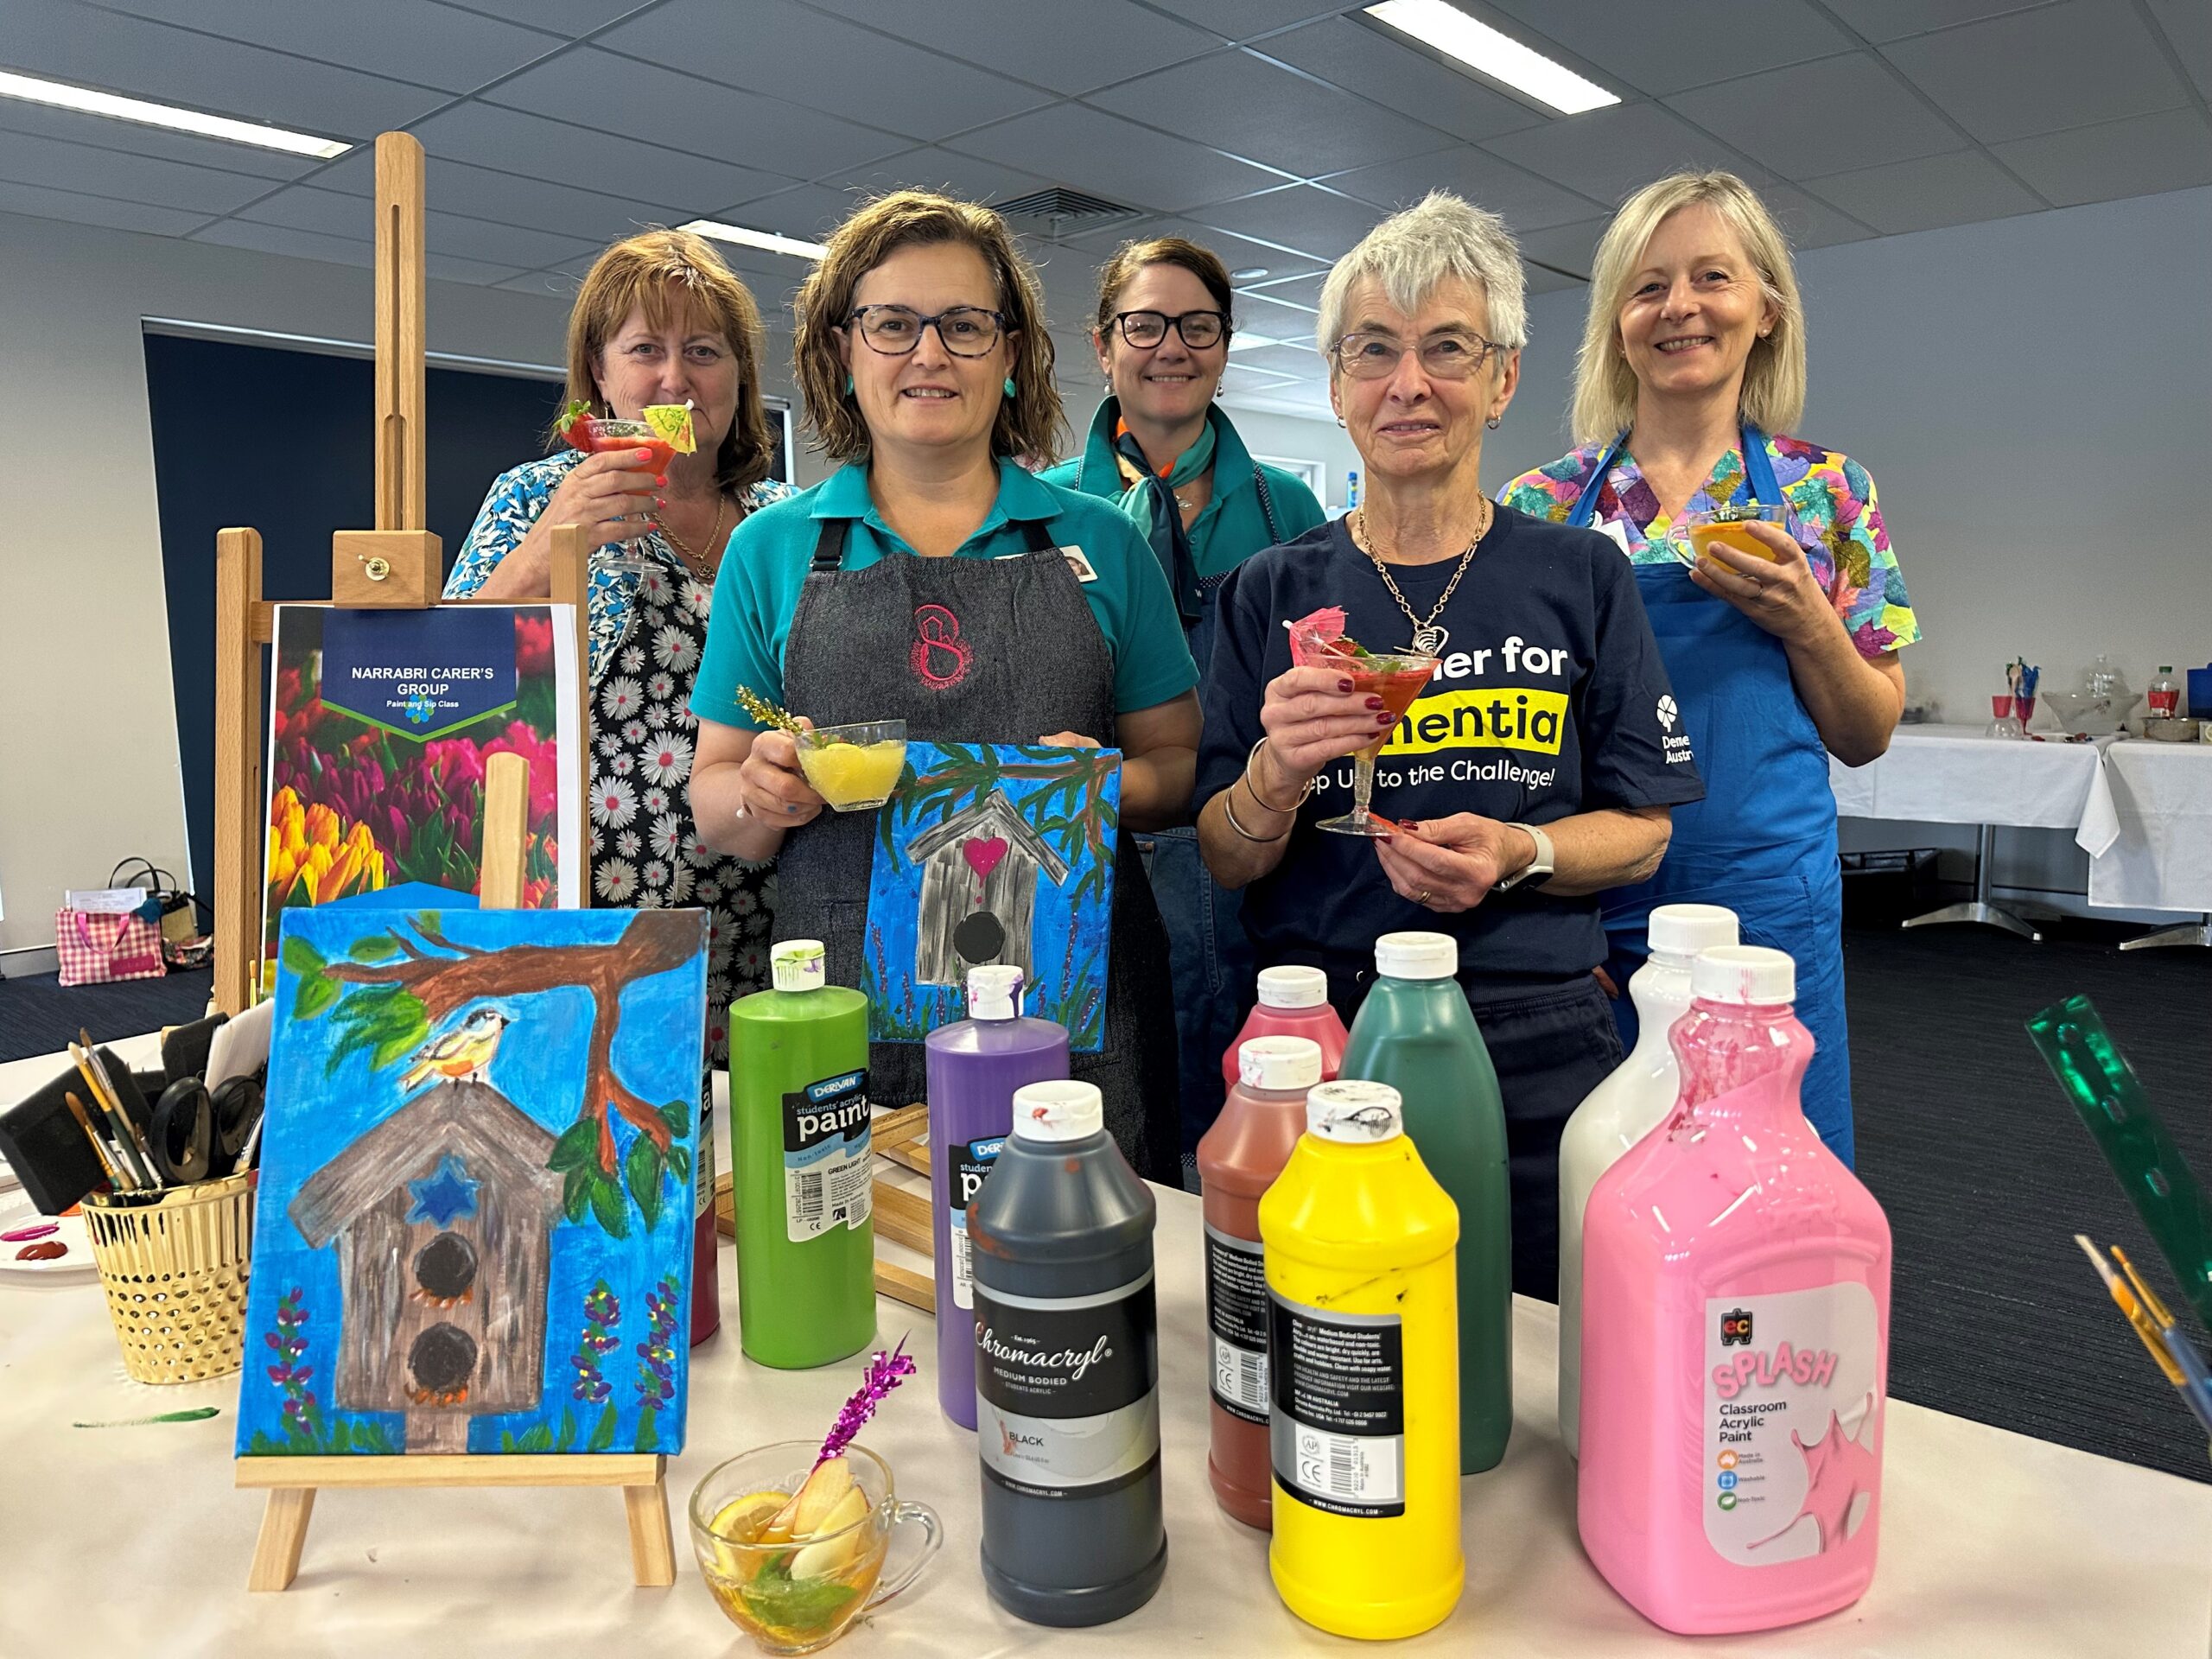 Painting a brighter future for carers